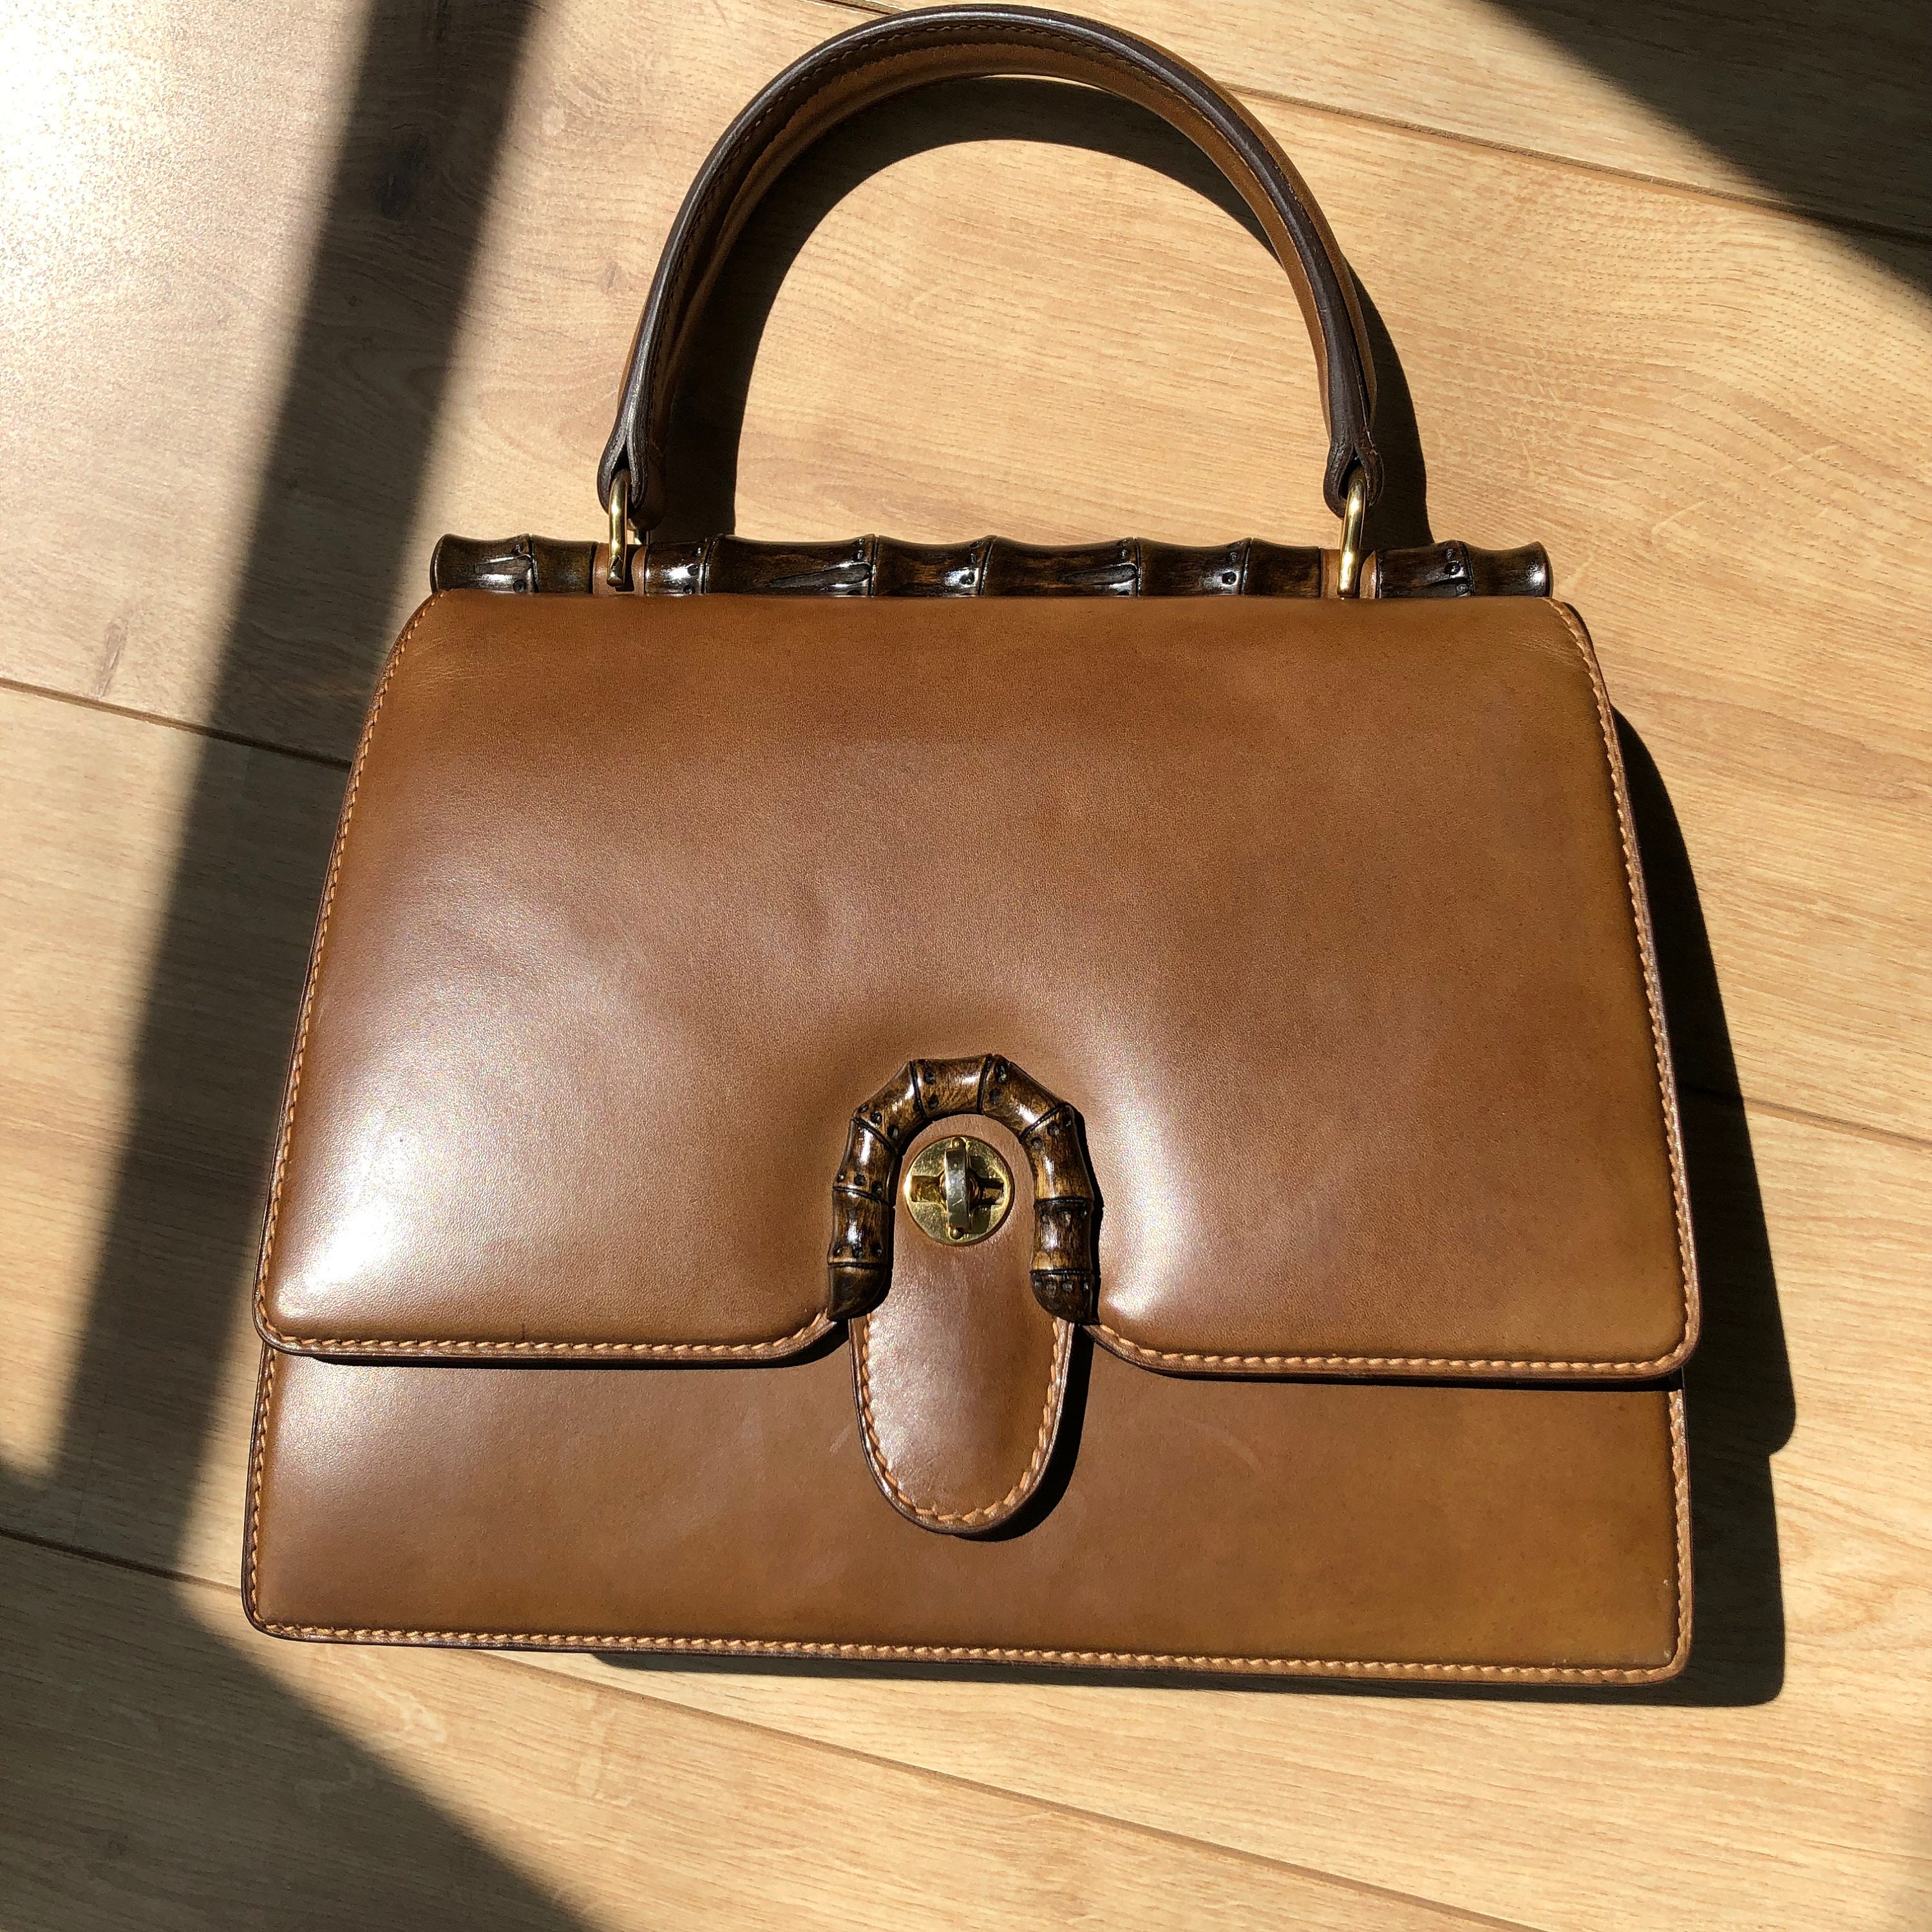 Stunning 1950's Brown Leather Gucci Original Handbag Made in Italy Small  Purse Gold Accents